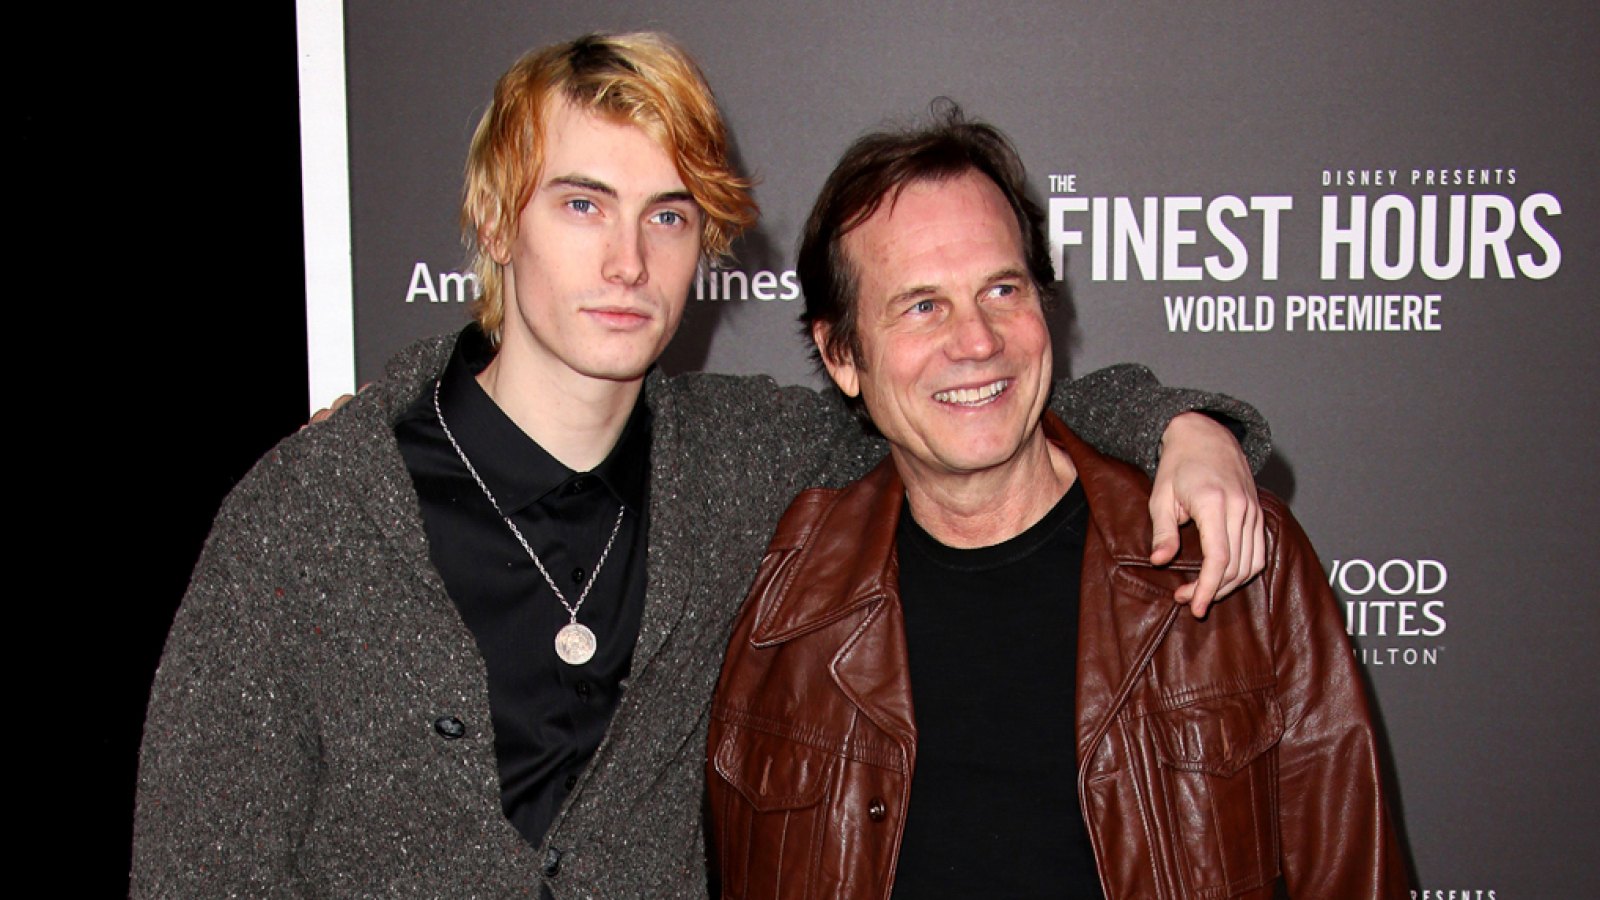 Bill Paxton's Son James Paxton Replaces Late Father in 'Agents of S.H.I.E.L.D'